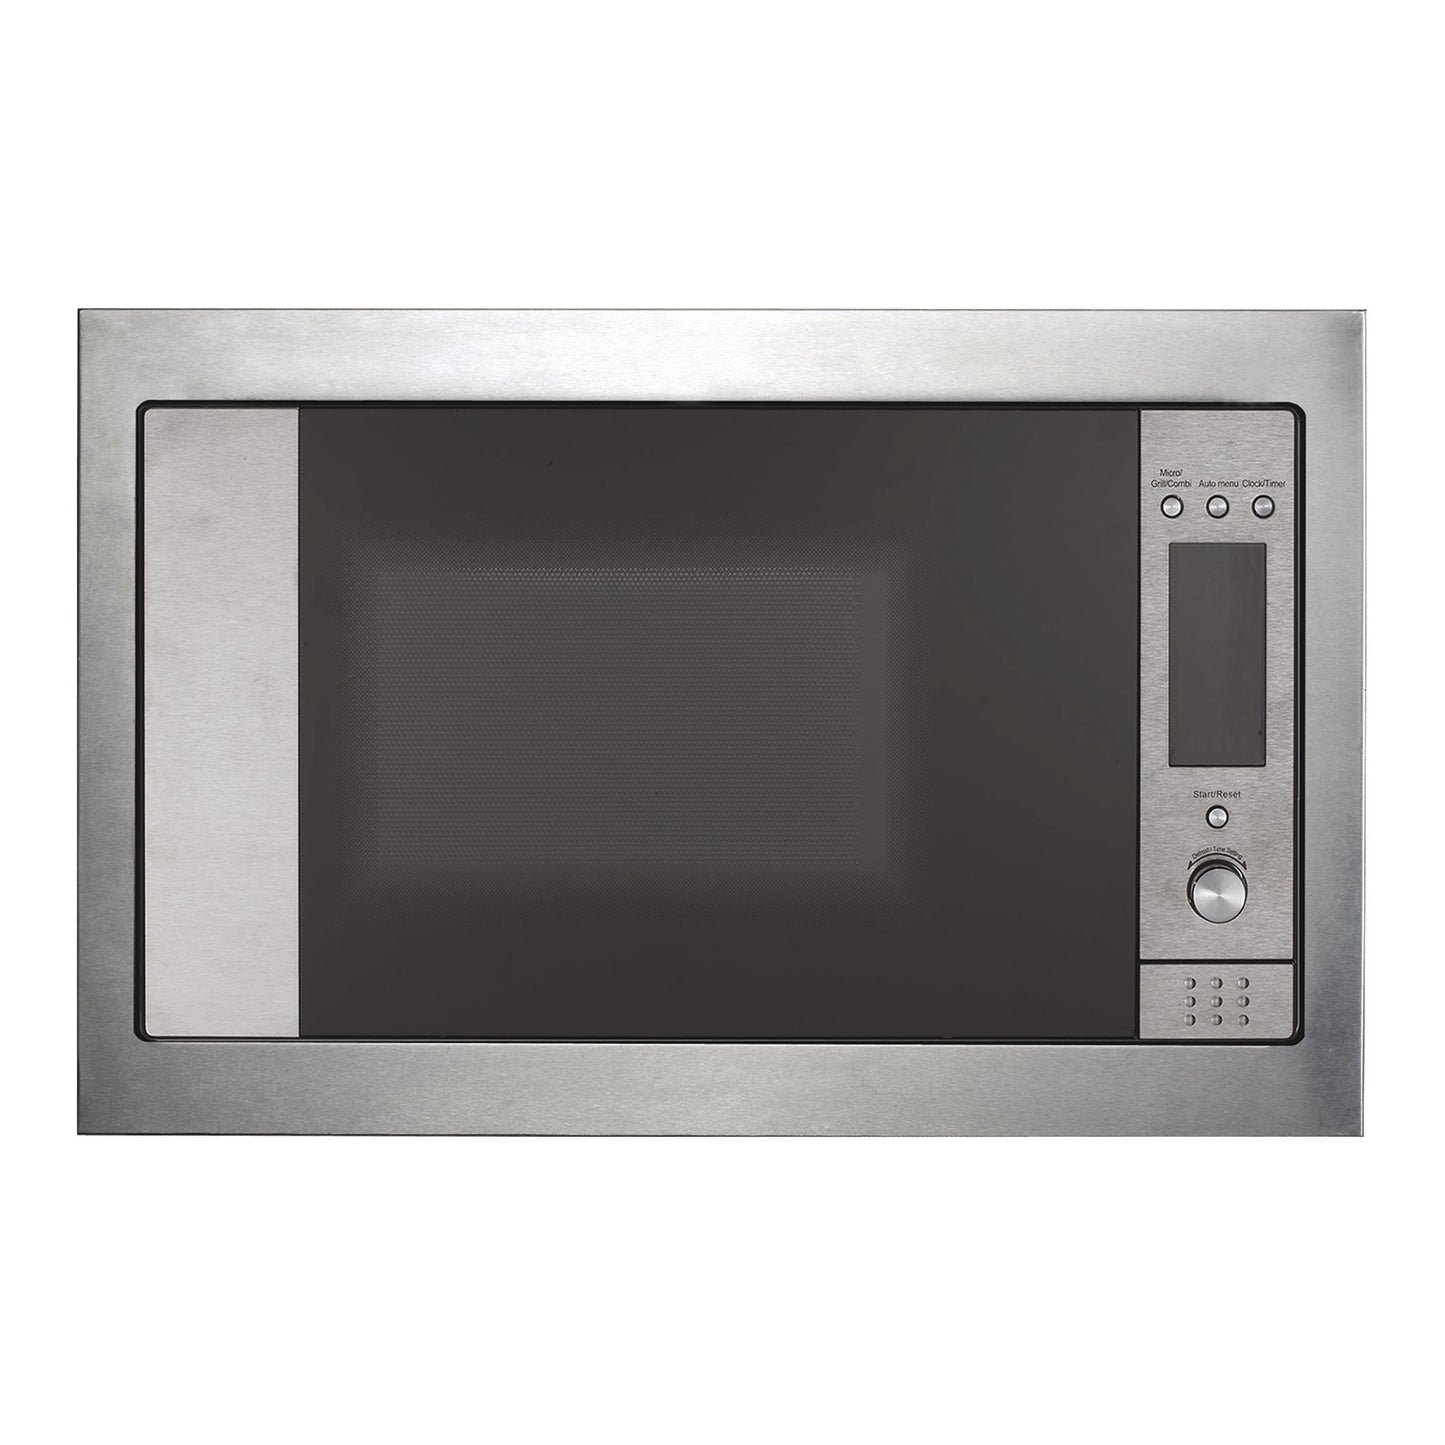 GORENJE Built in Compact Microwave With Grill 60 cm 30 Liter - Stainless Steel BM5350X